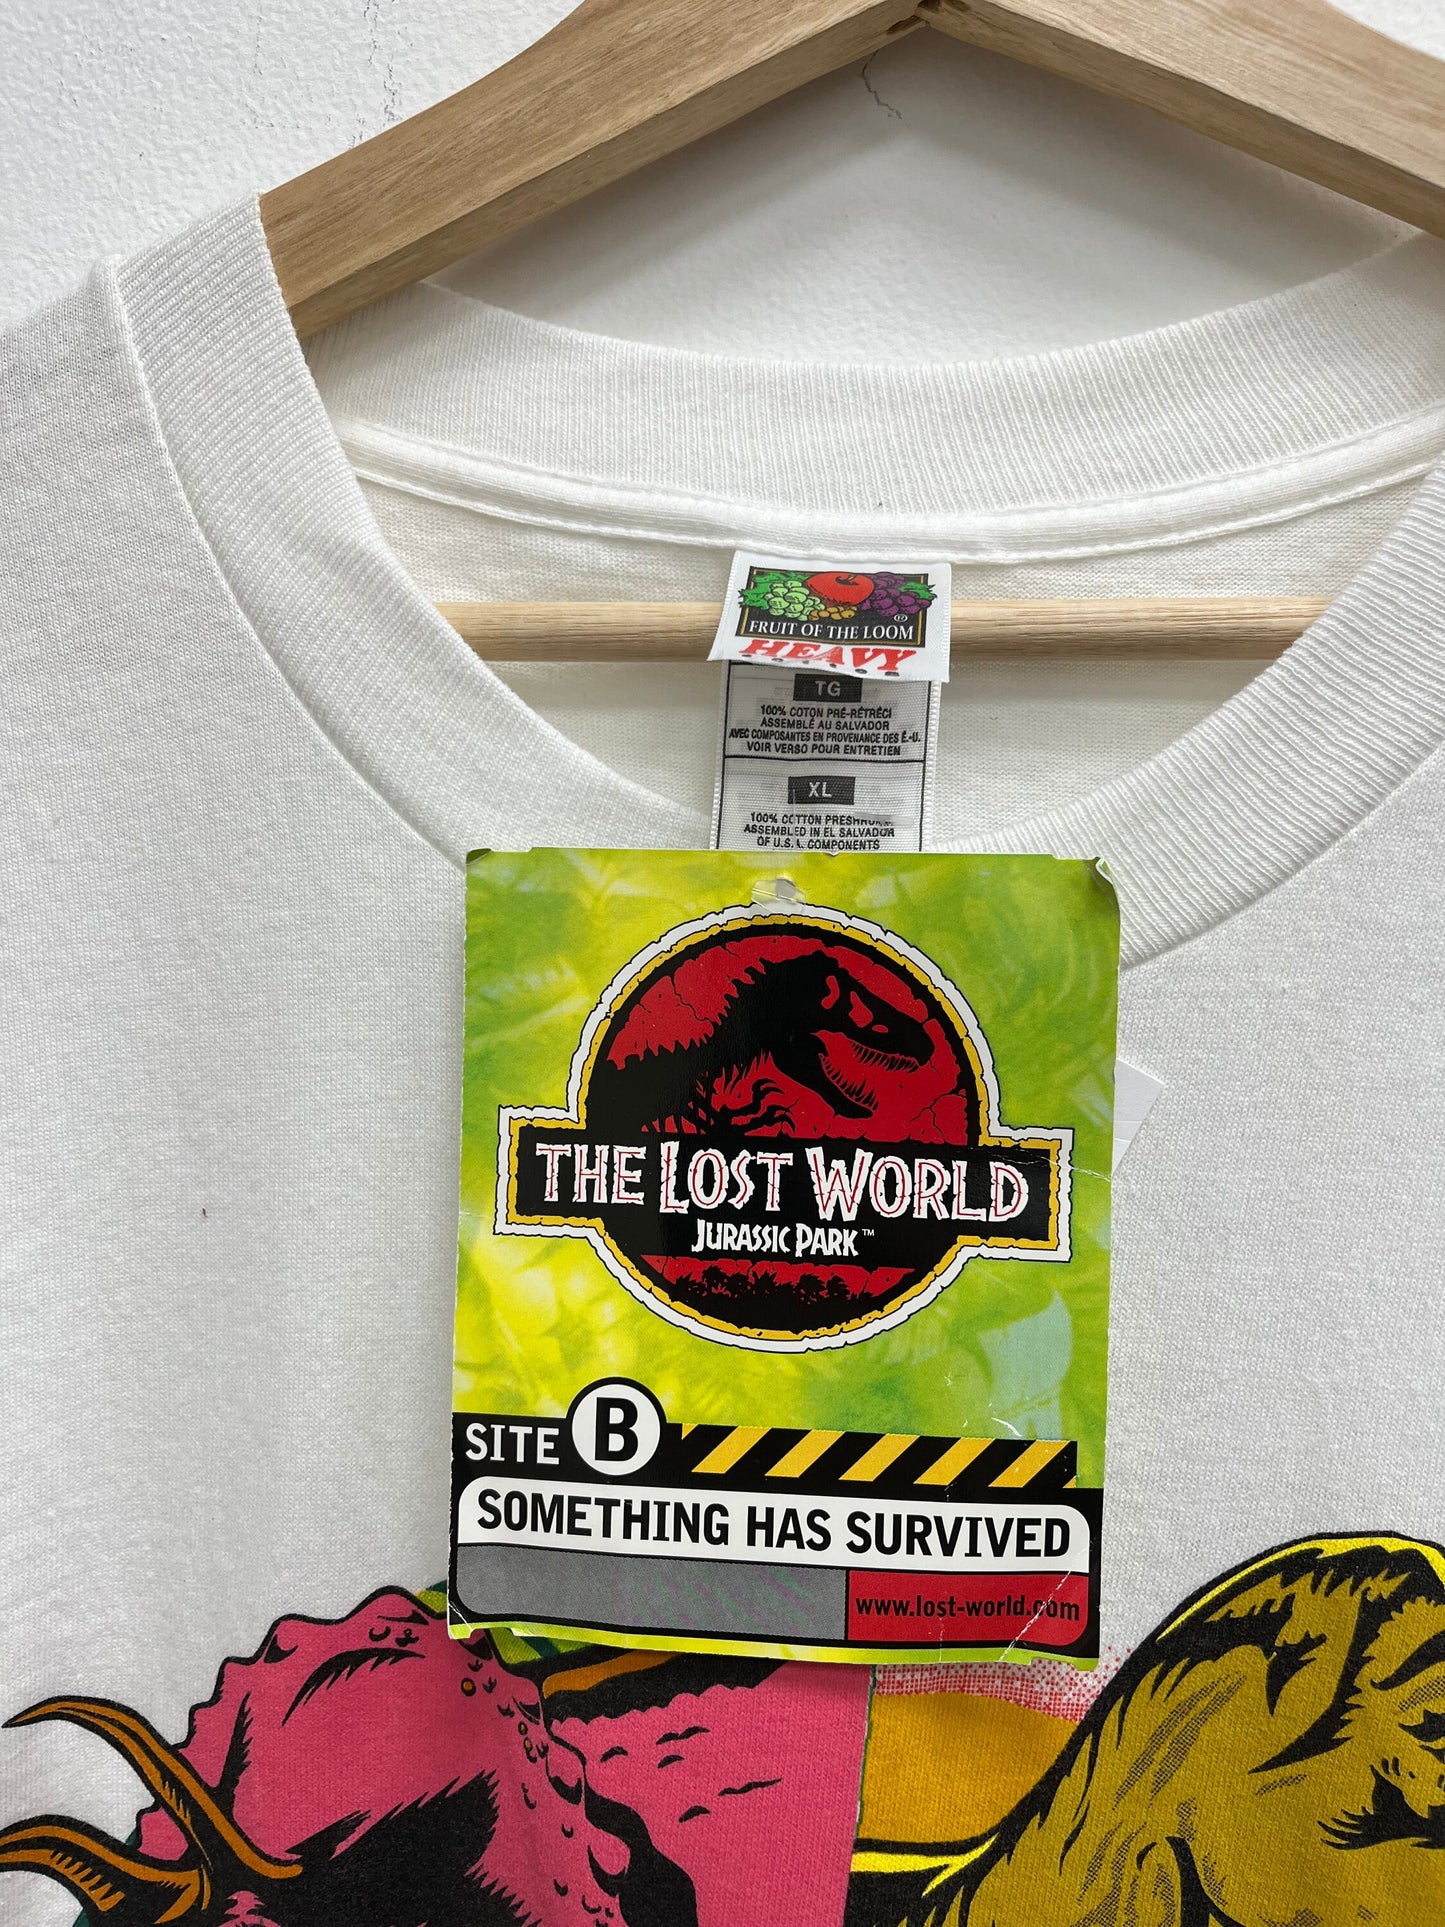 NWT Vintage 1990’s Jurassic Park The Lost World Tee